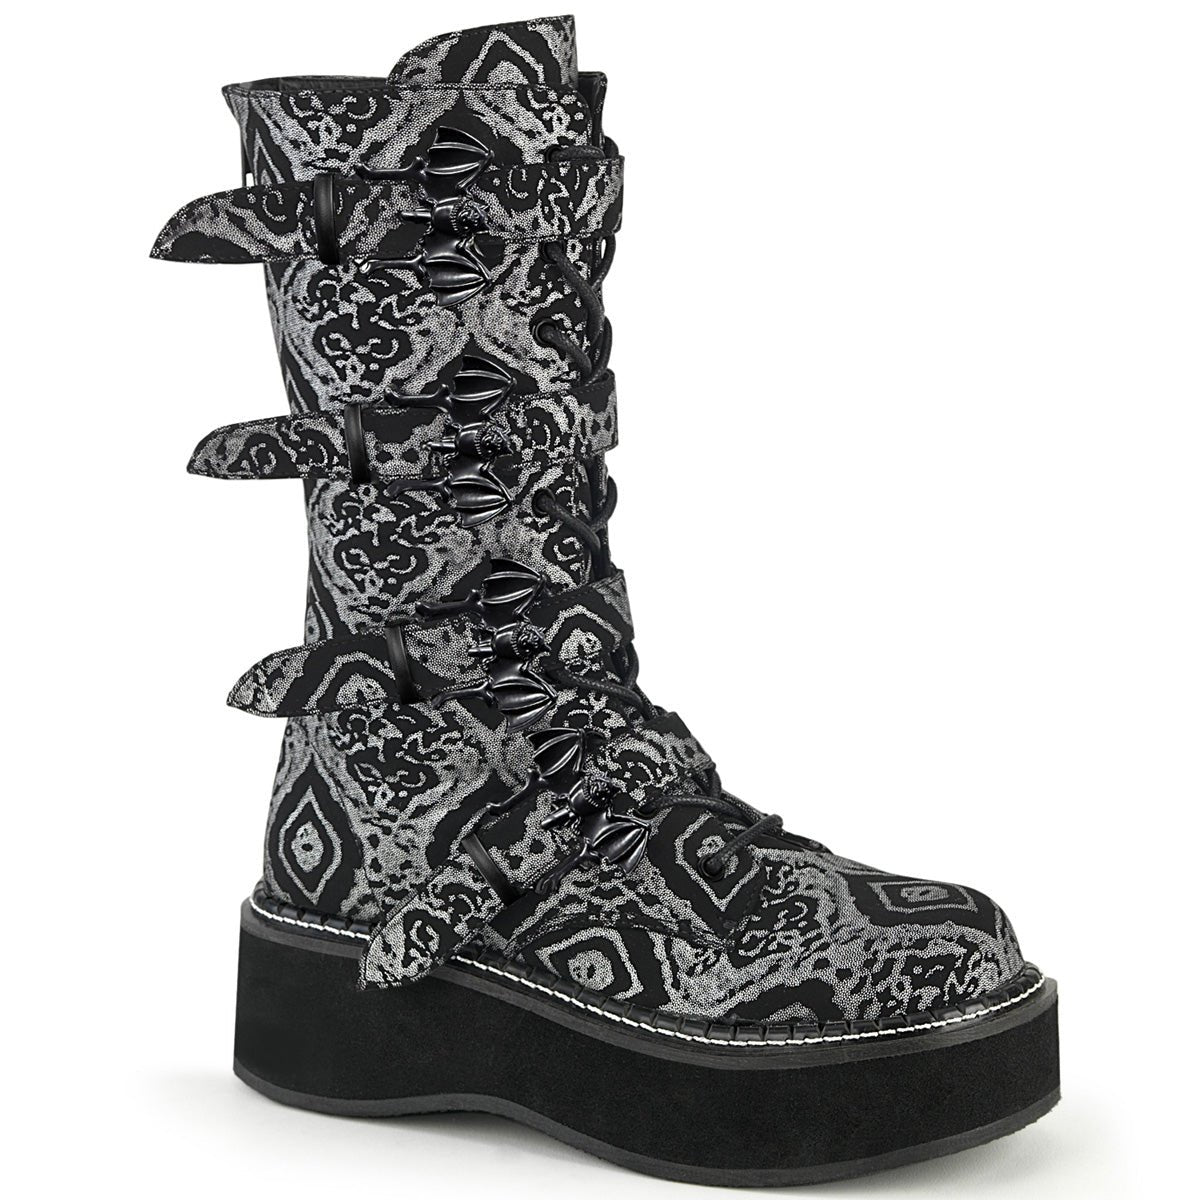 Too Fast | Demonia Emily 322 | Black & Silver Faux Nubuck Leather Women's Mid Calf Boots